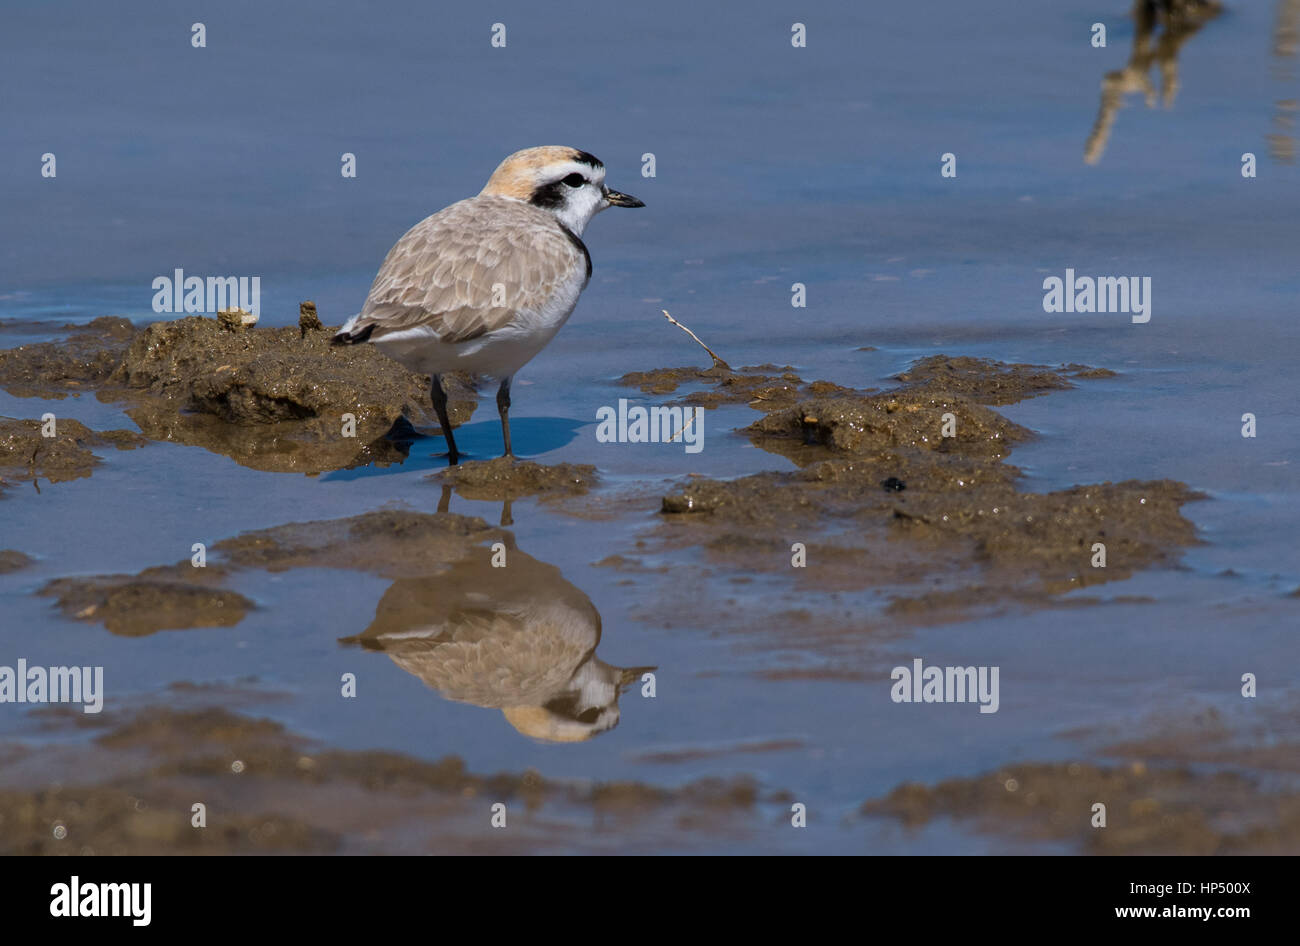 A Beautiful Snowy Plover and Reflection Stock Photo